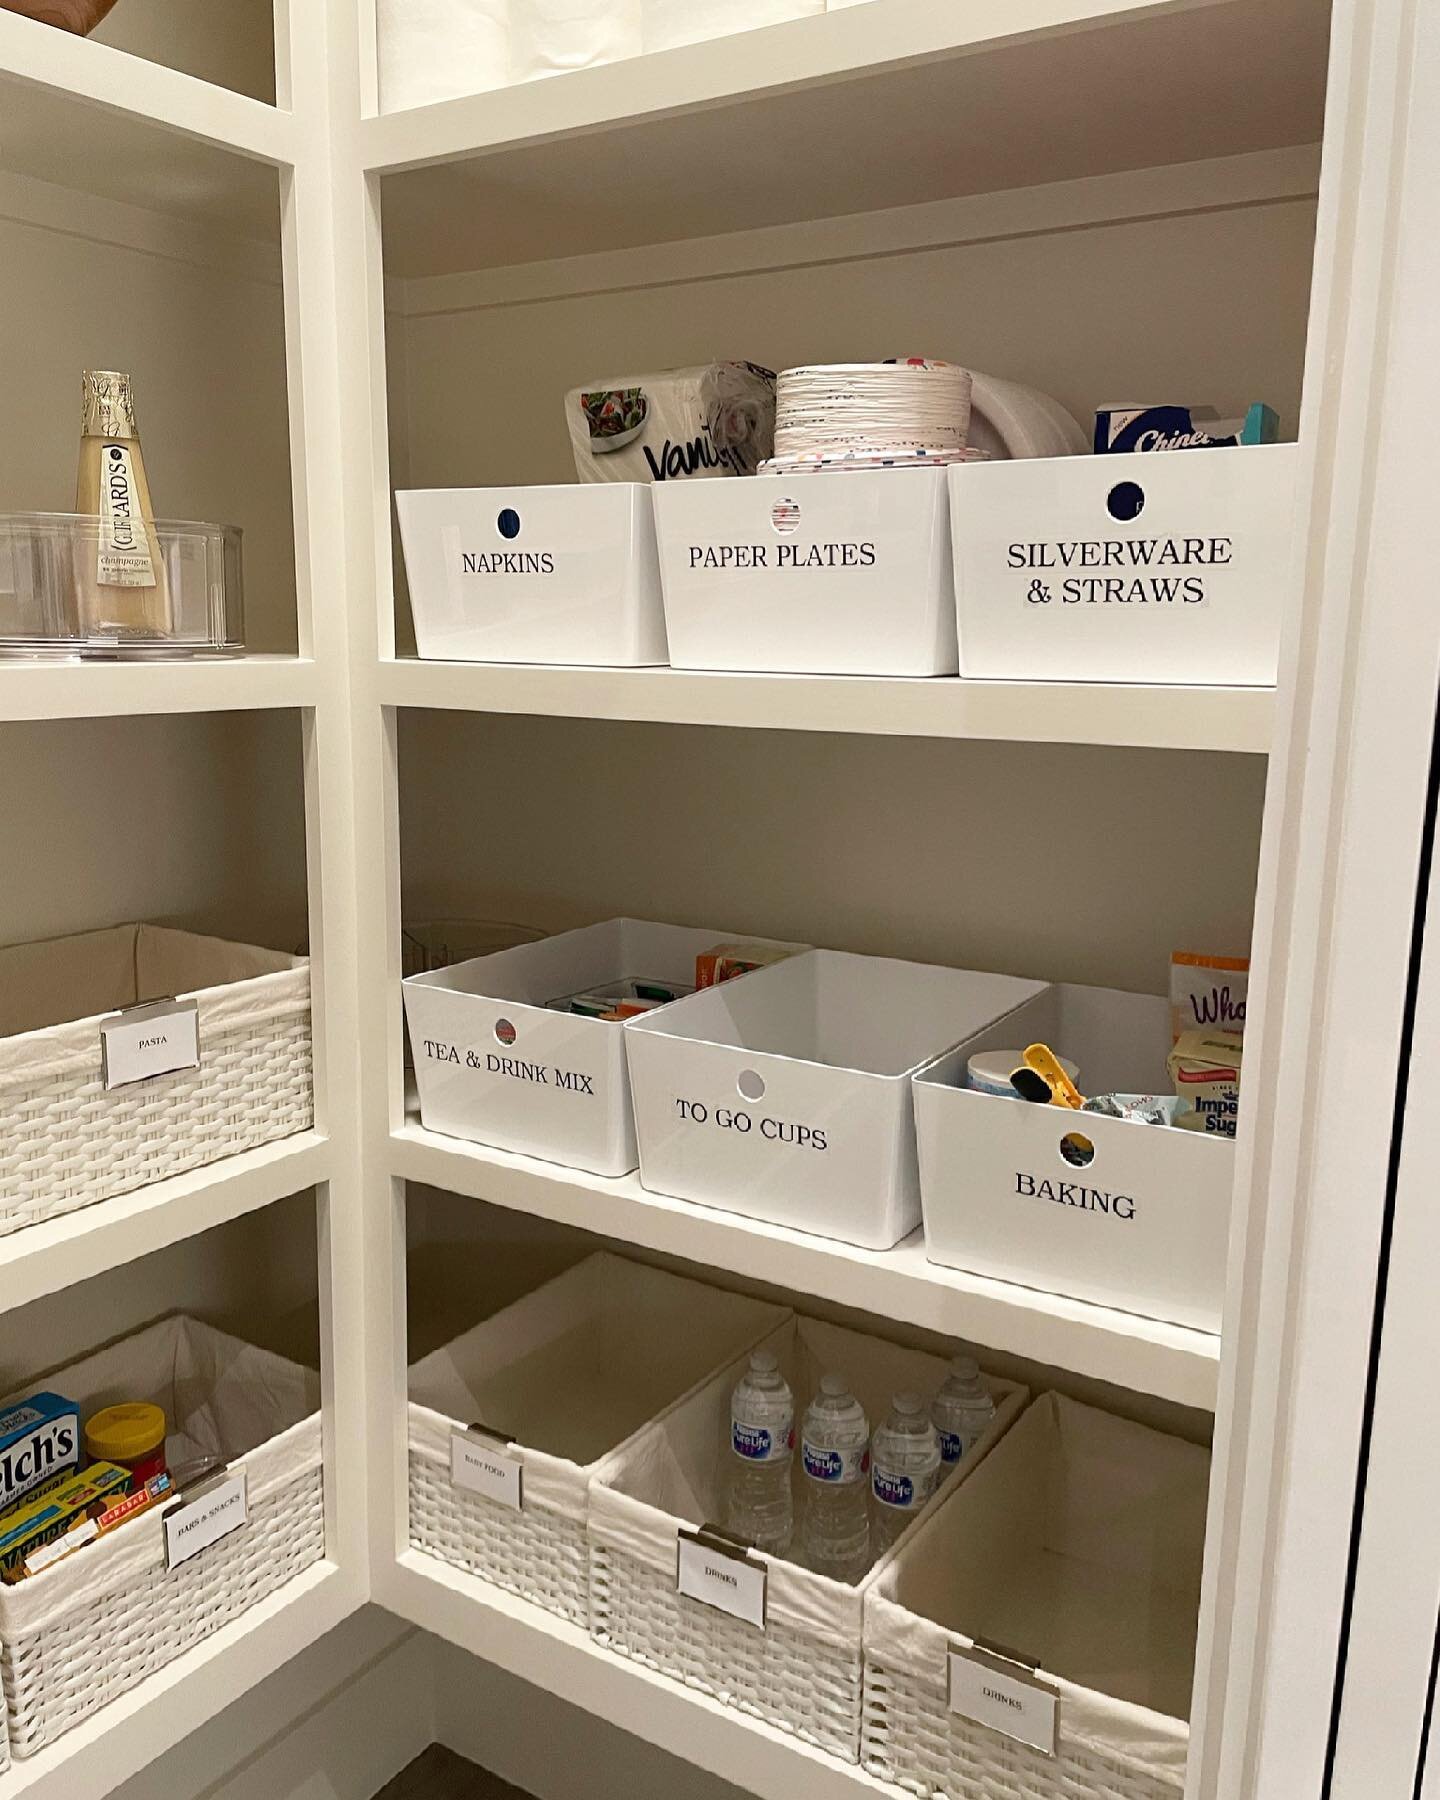 Starting summer off right with this white and bright pantry! 🤍🤍
.
.
#crosswellorganizing #pantryorganization #pantry #summer #summerorganization